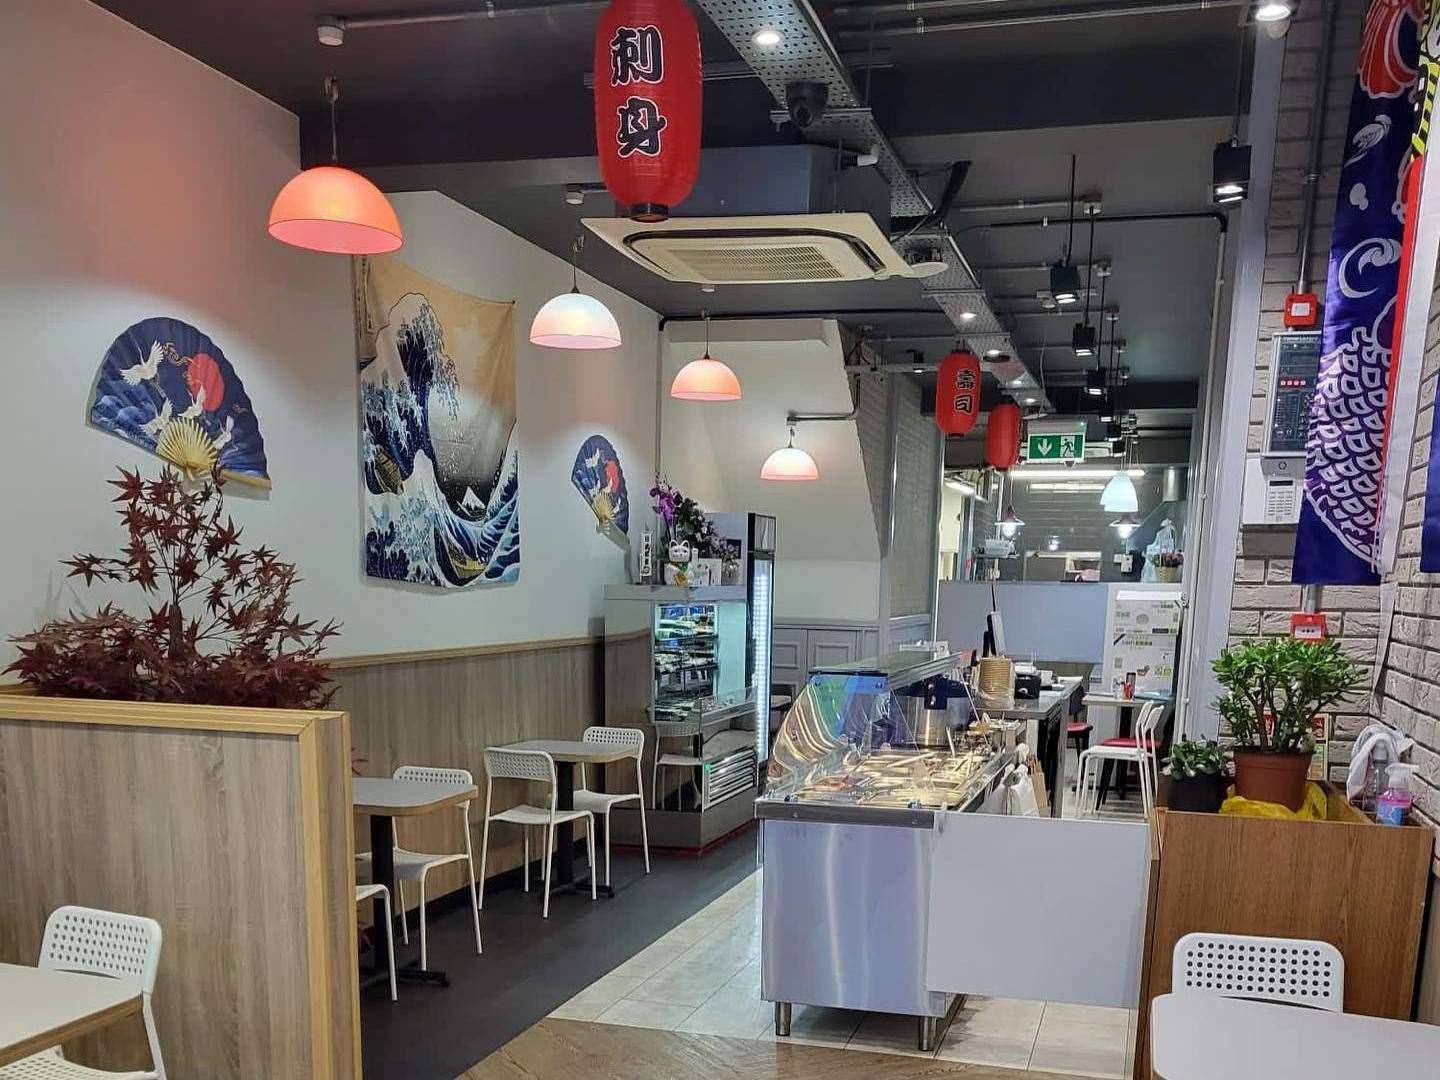 The eatery is serving Japanese cuisine in Chatham High Street. Picture: Sushi Moto and Bento